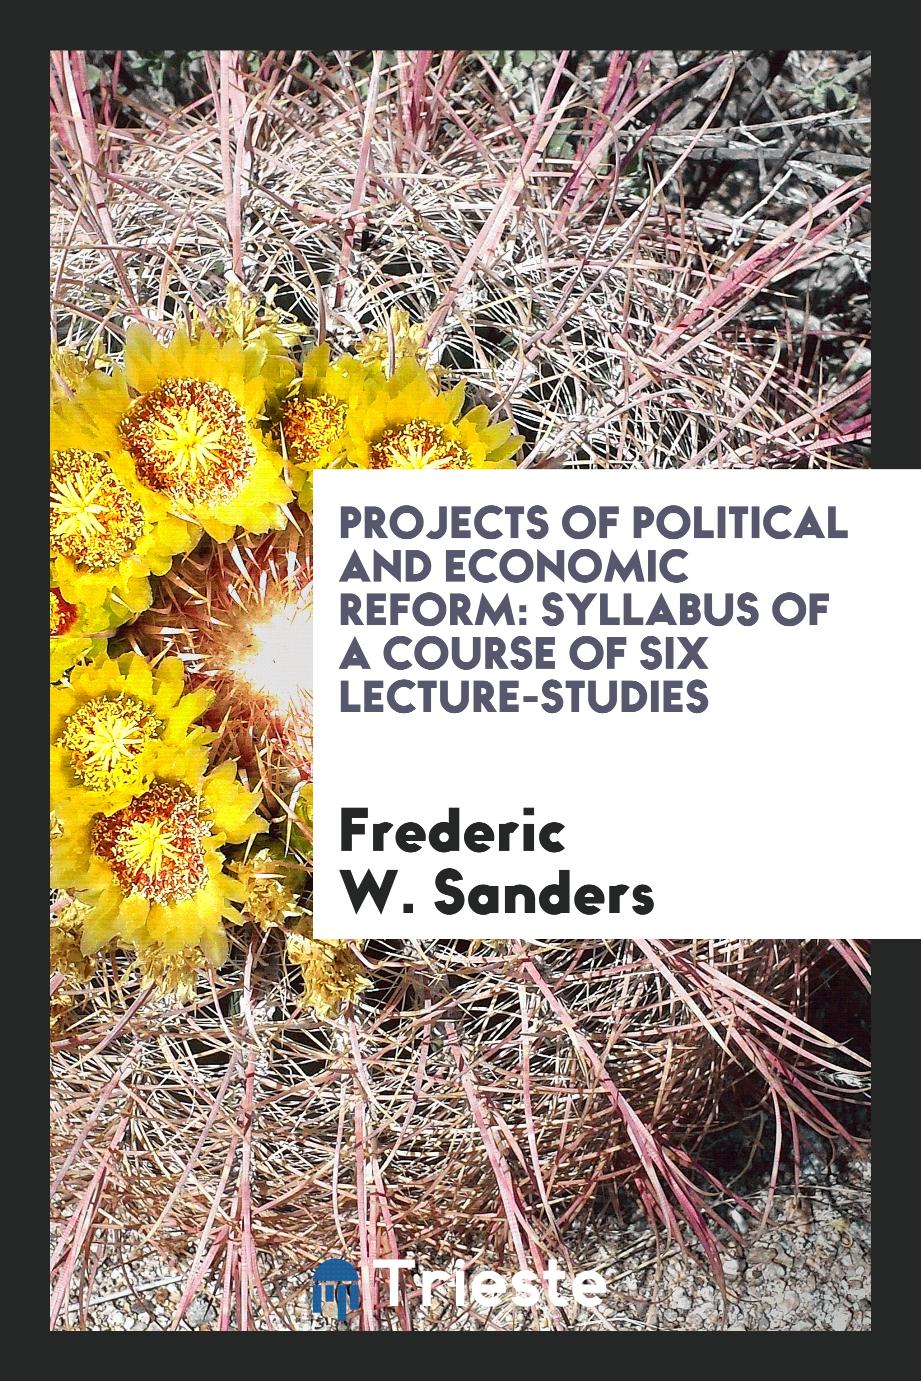 Projects of Political and Economic Reform: Syllabus of a Course of Six lecture-studies